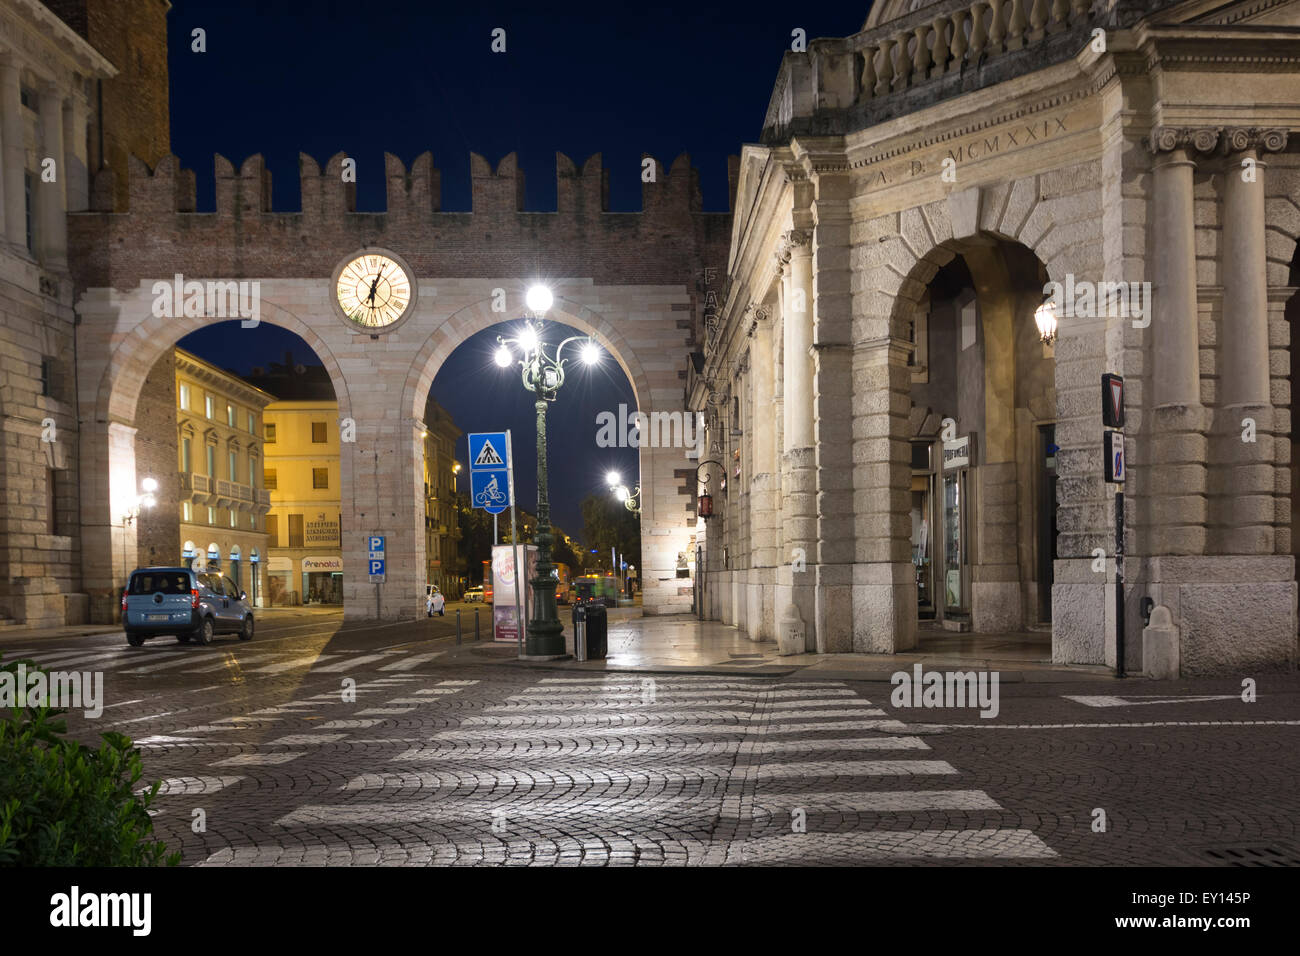 Before Dawn in a deserted Piazza Bra in Verona, Italy Stock Photo